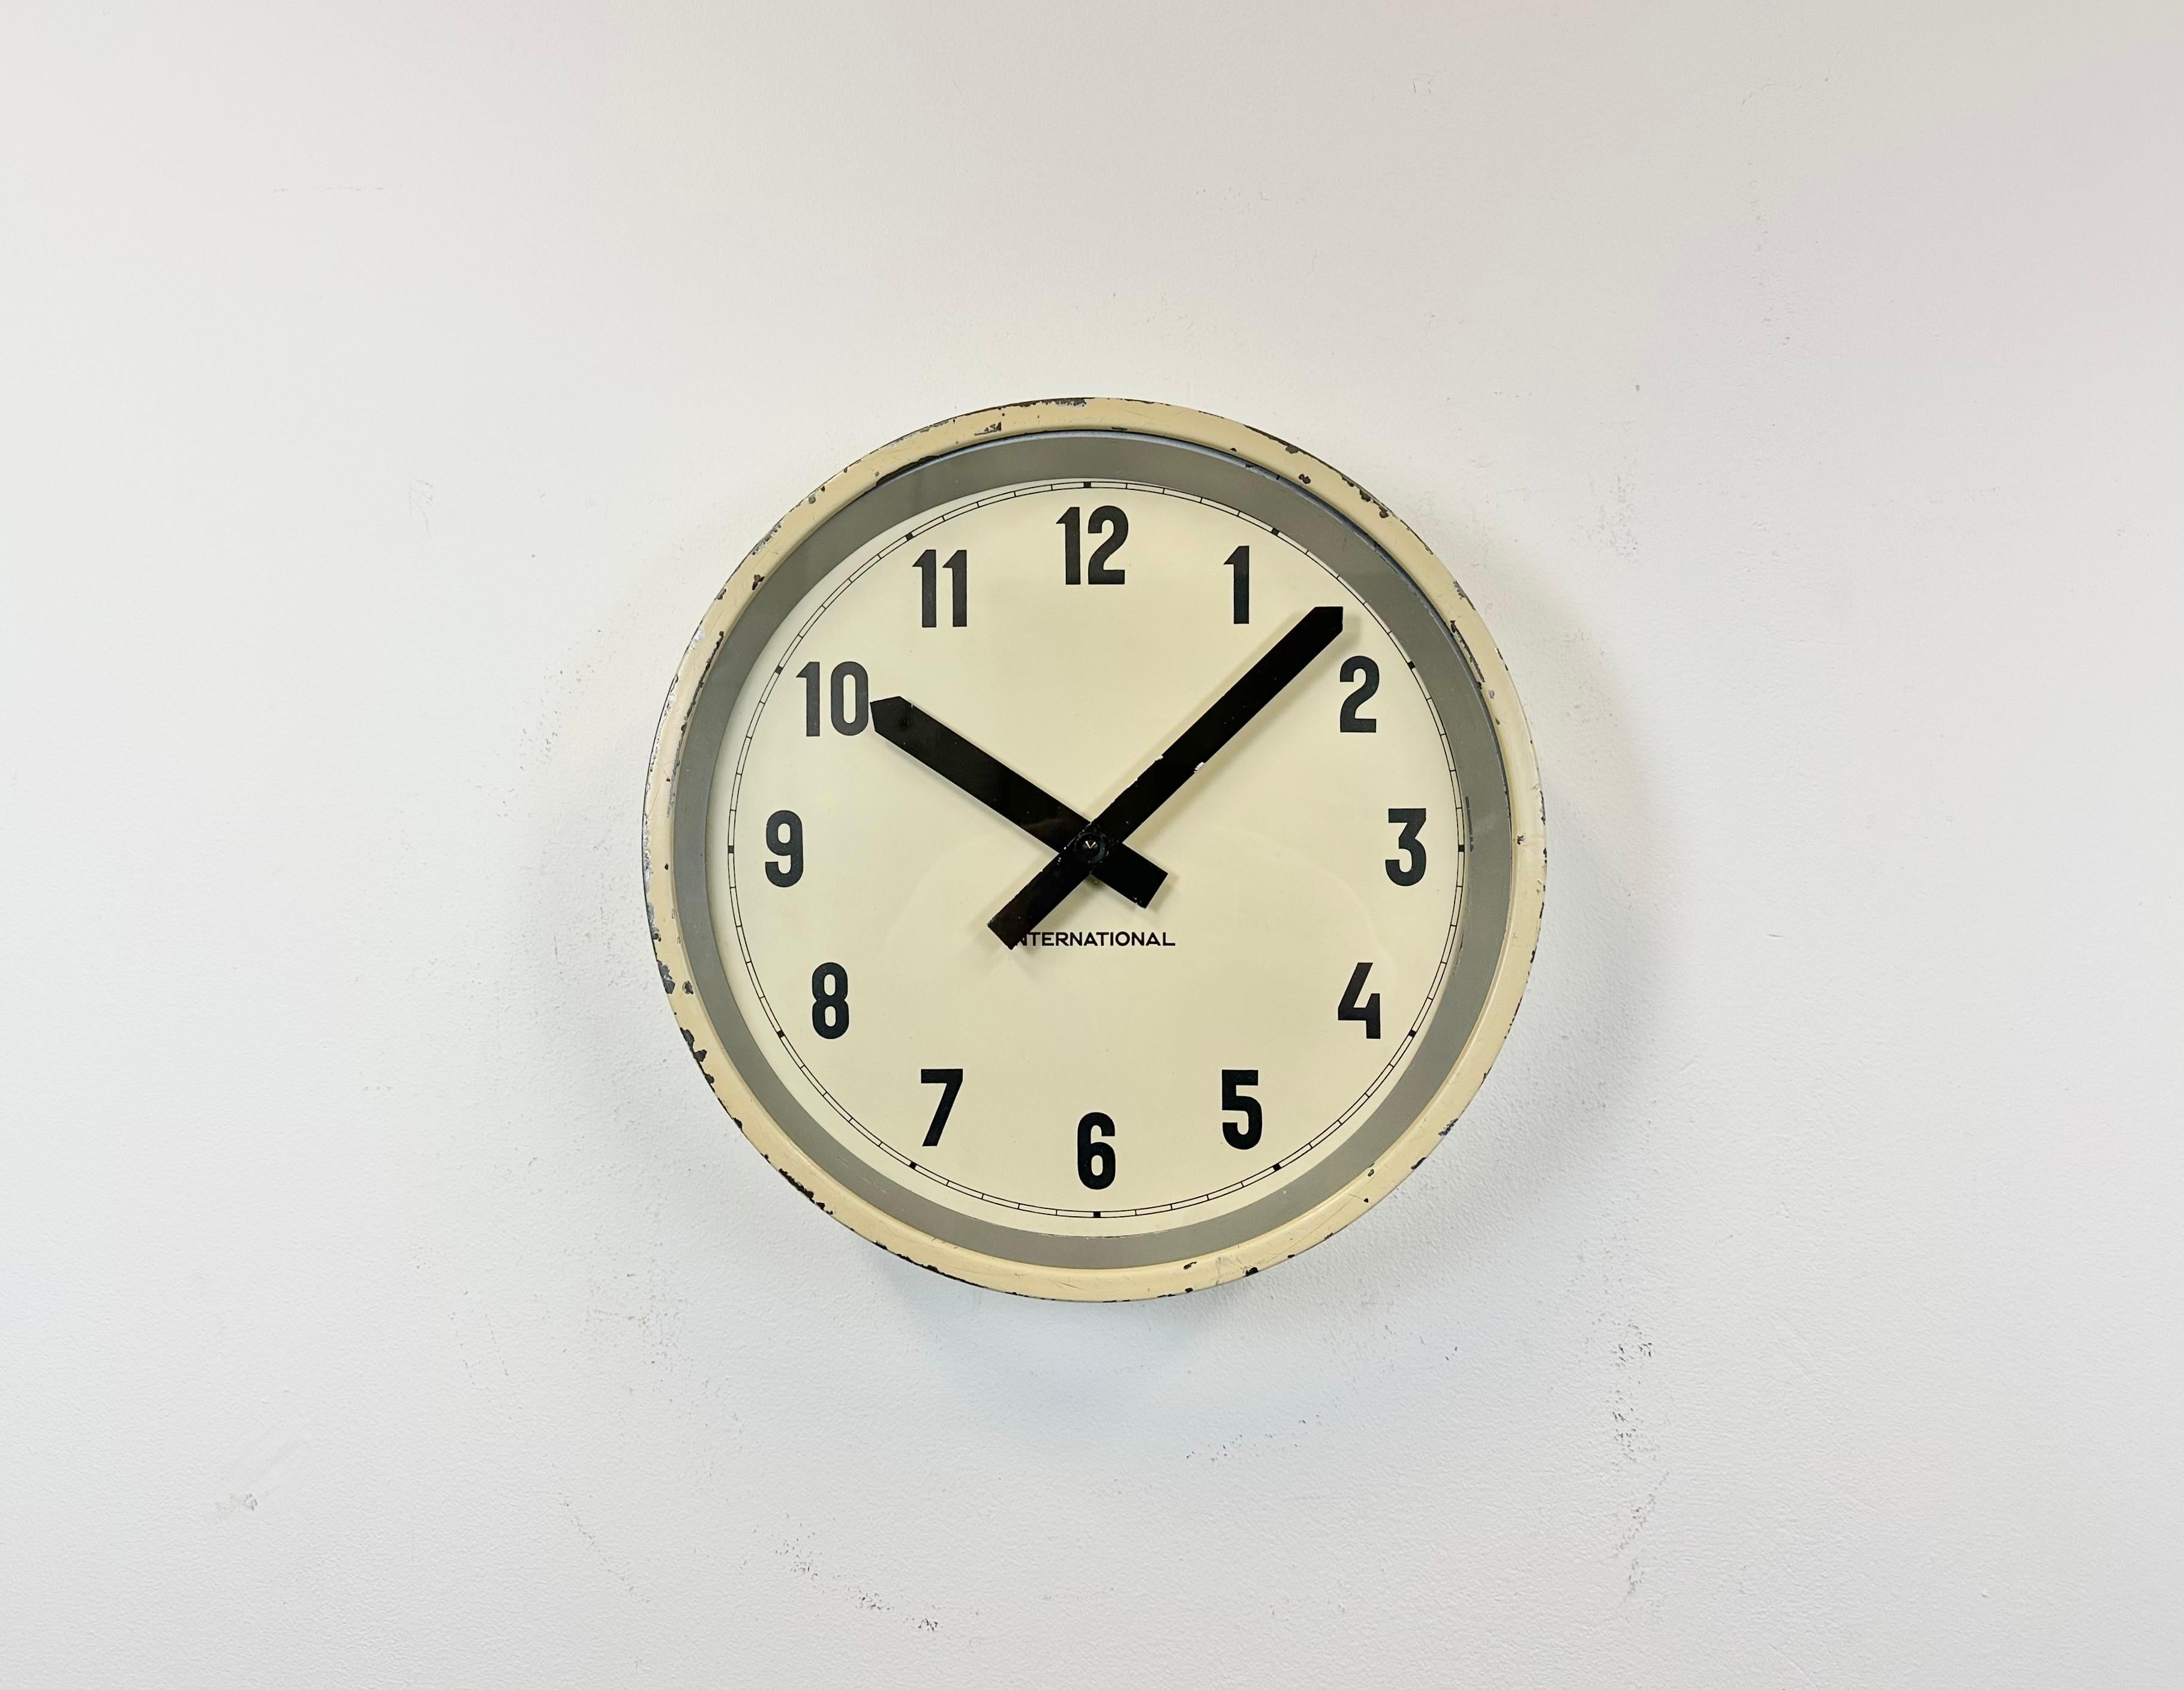 This wall clock was produced by International in Germany during the 1950s. It features a beige metal frame, an iron dial, an aluminium hands and a clear glass cover. The piece has been converted into a battery-powered clockwork and requires only one